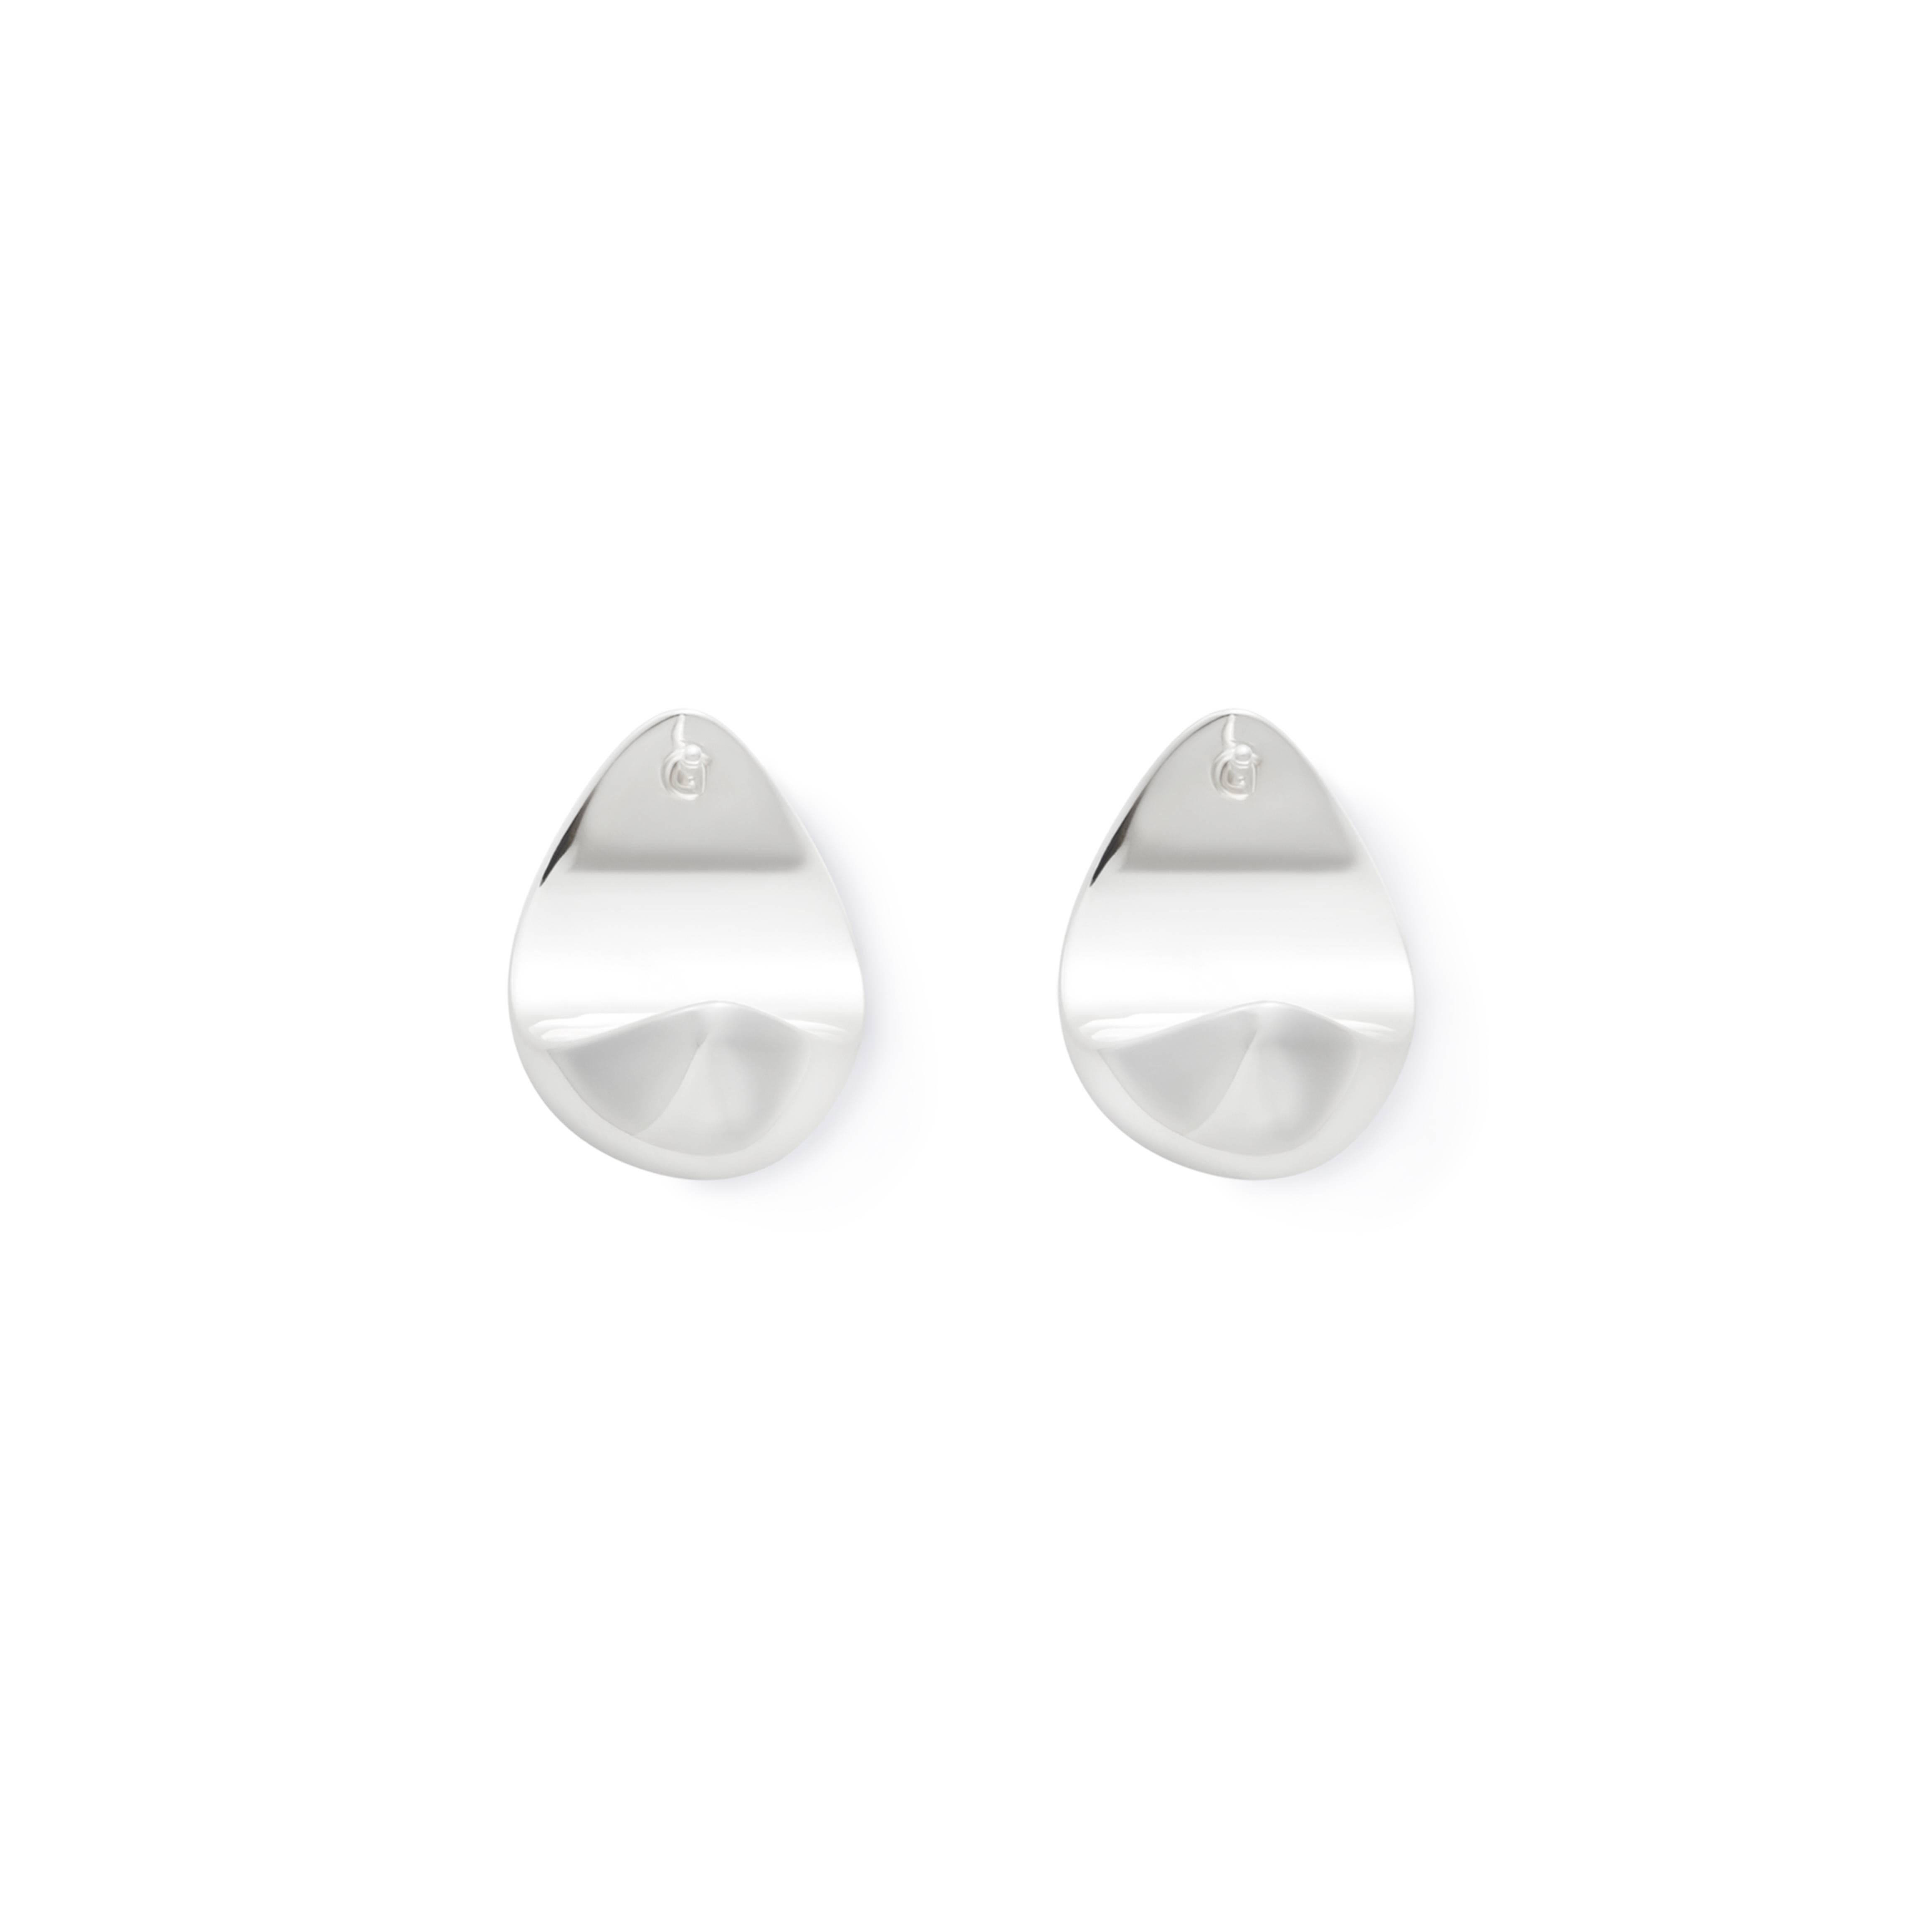 From the Nova 03 collection come the beautiful and classic drop shaped Microcosm Earrings. Made from sterling silver and with a high polish finish. These earrings are easy and comfortable to wear, for pierced ears
